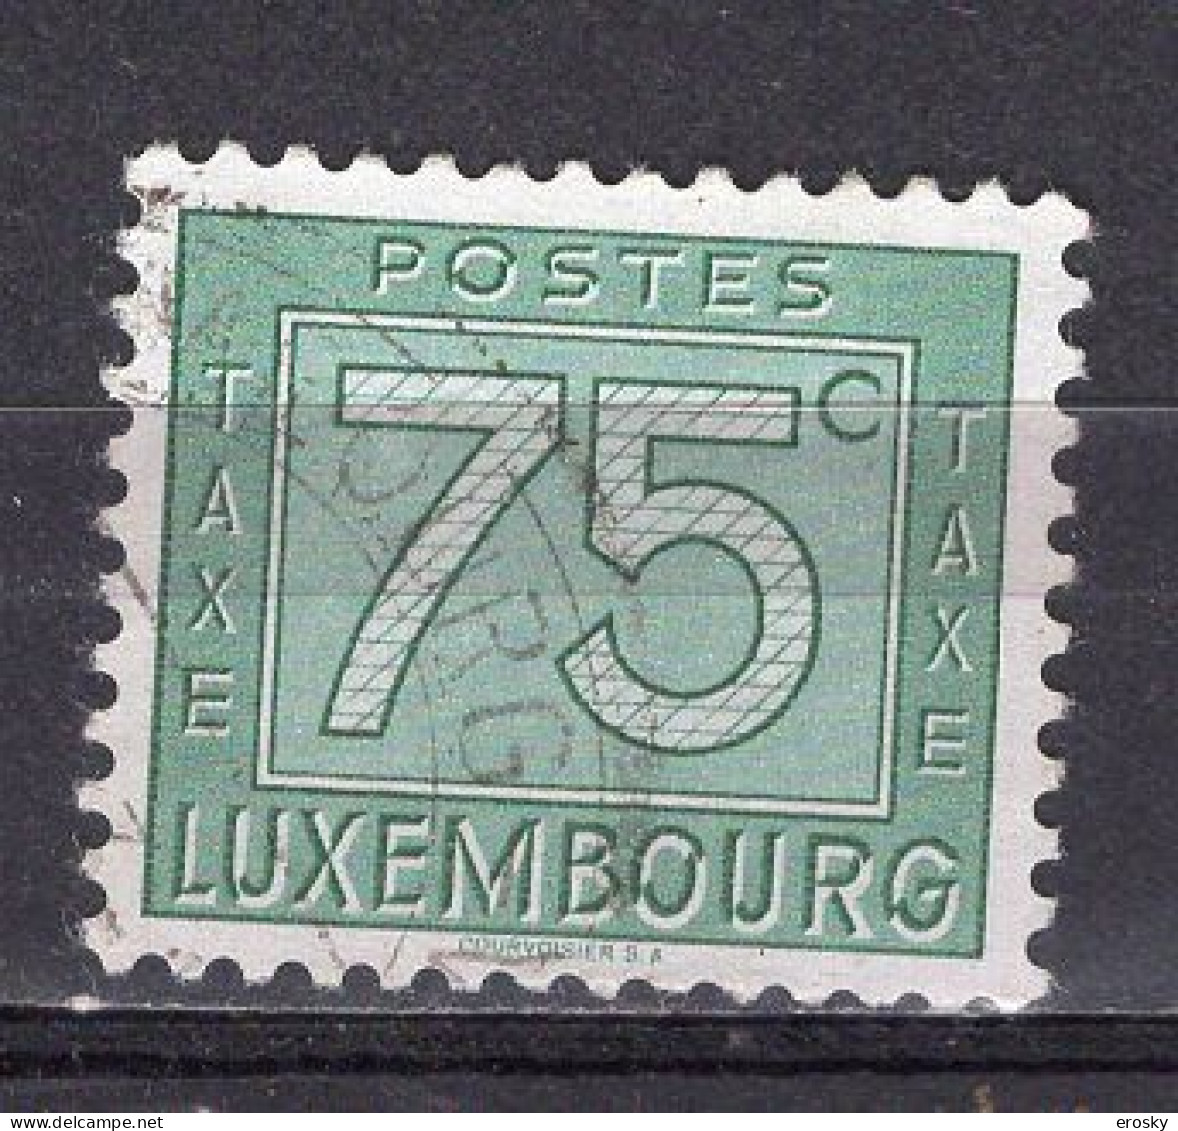 Q4499 - LUXEMBOURG TAXE Yv N°29 - Strafport